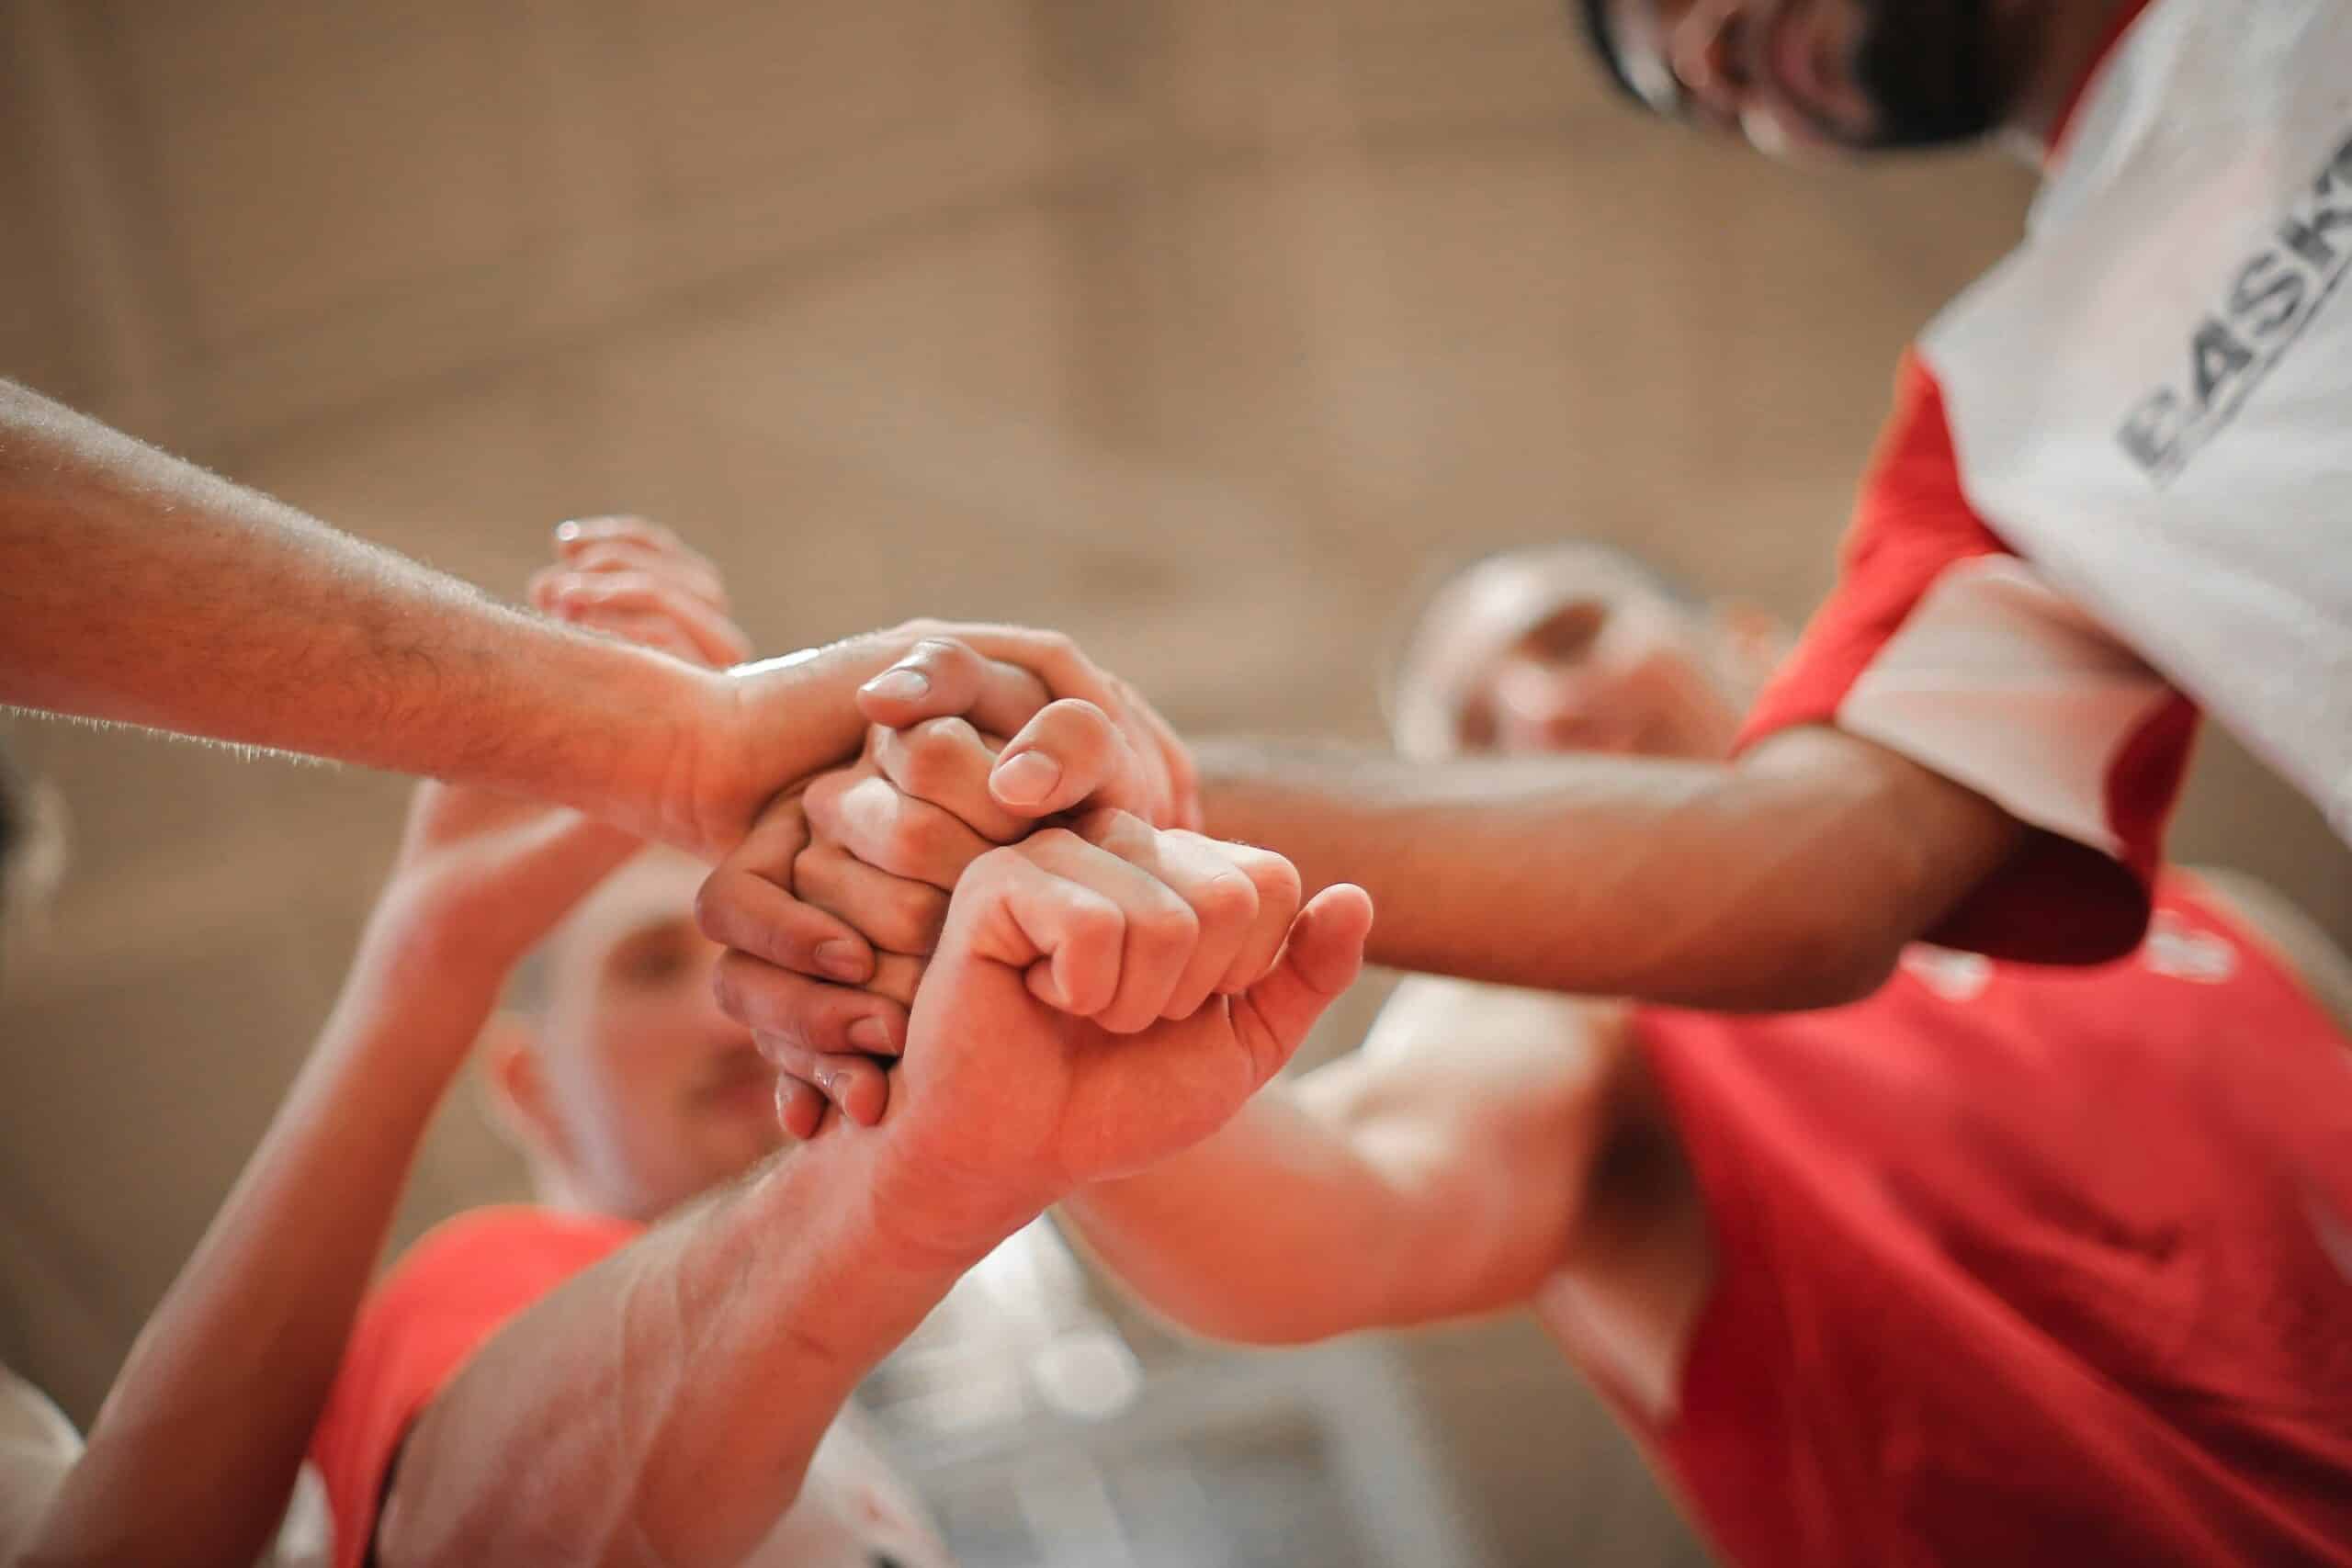 How to Build the Strengths of Your Team Members